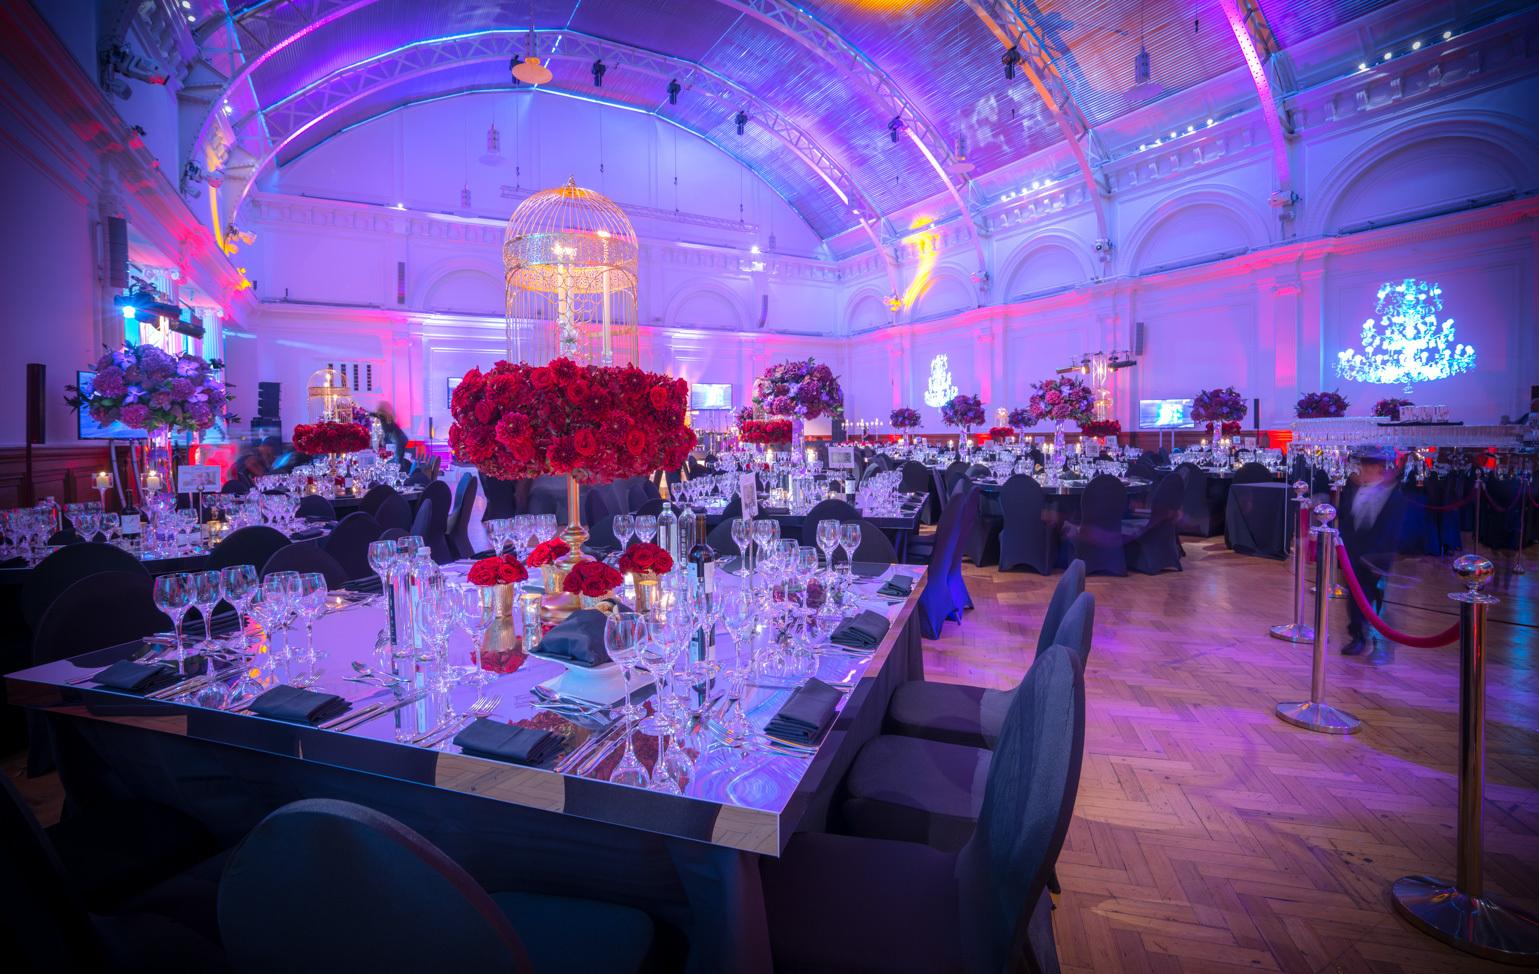 Royal Horticultural Halls - Lindley Hall, The Lindley Hall photo #3